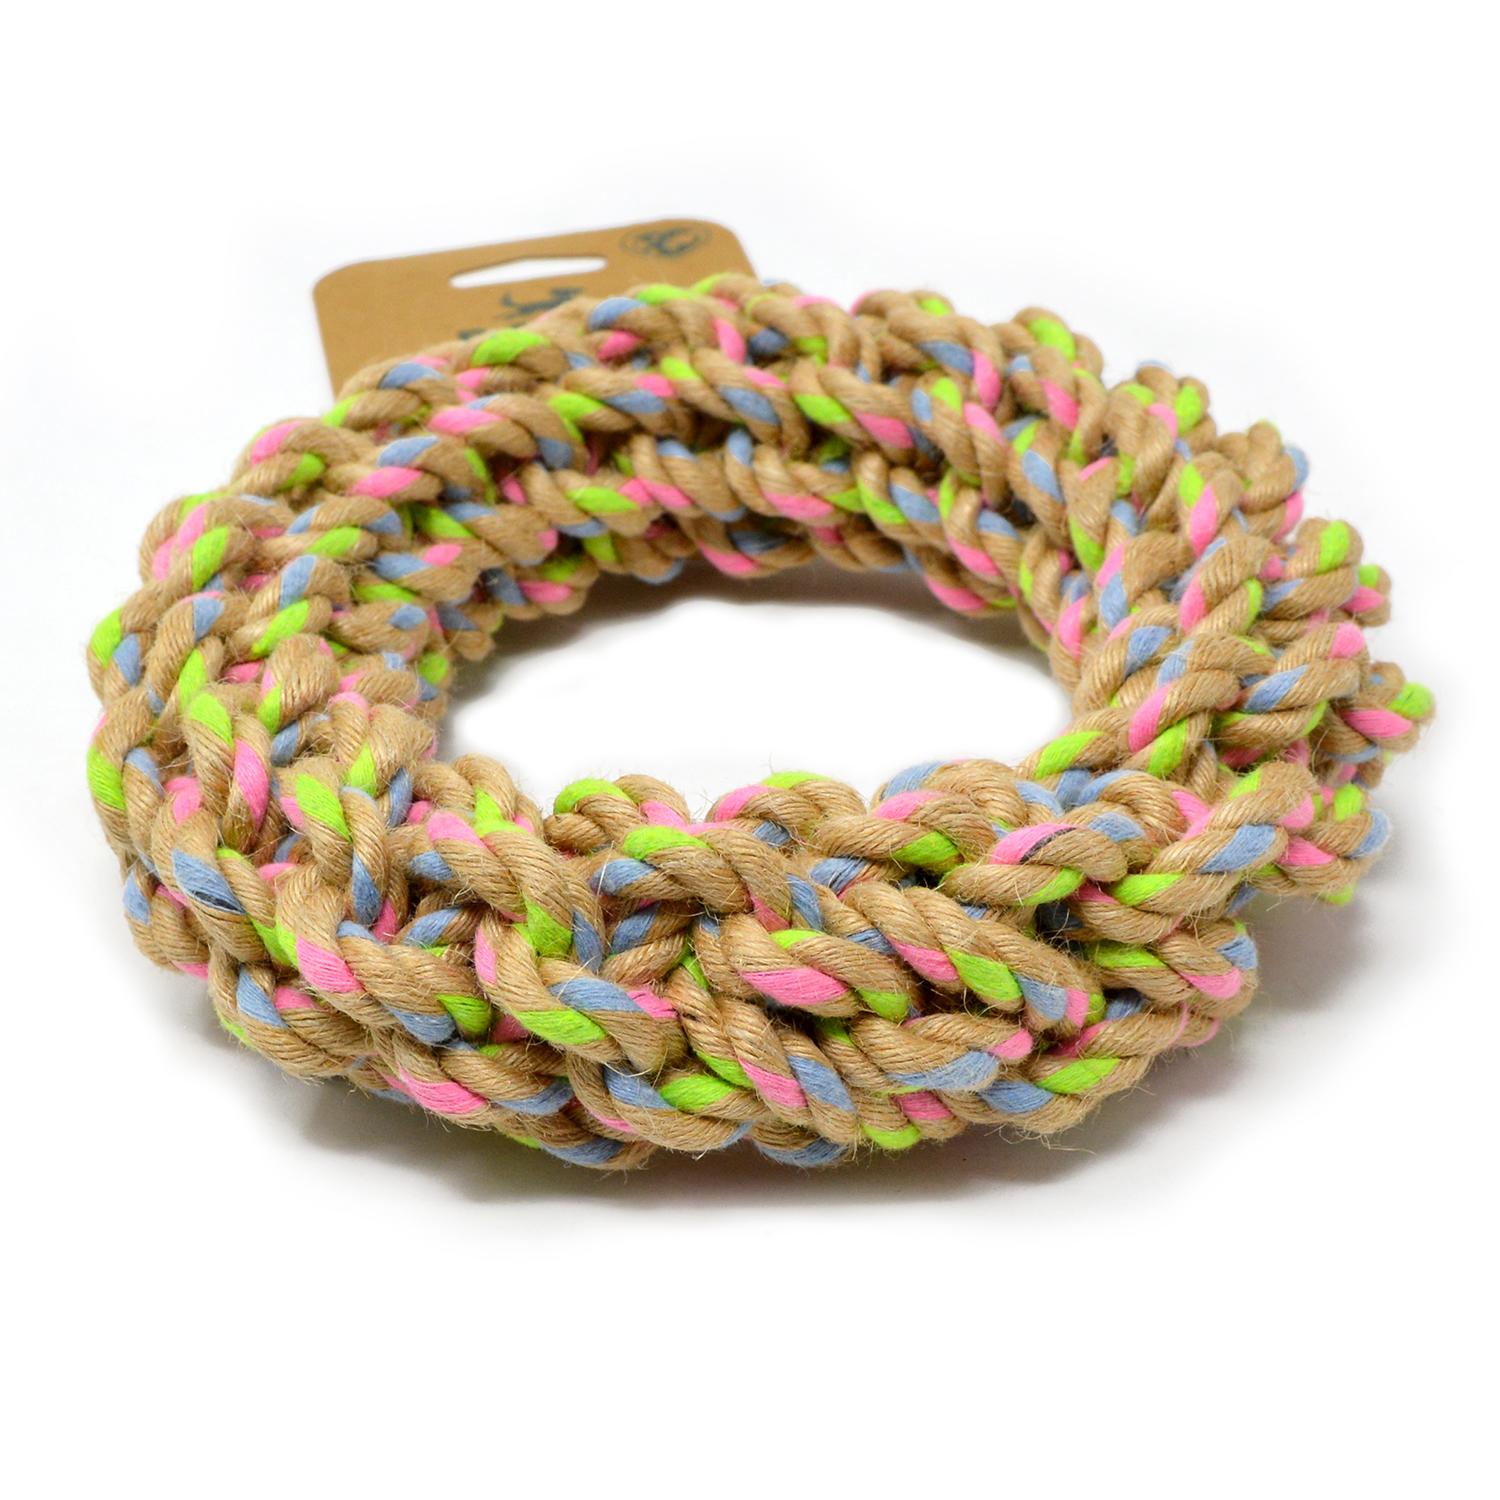 Close up of a Large Beco Knotted Hemp Rope Ring Dog Toy